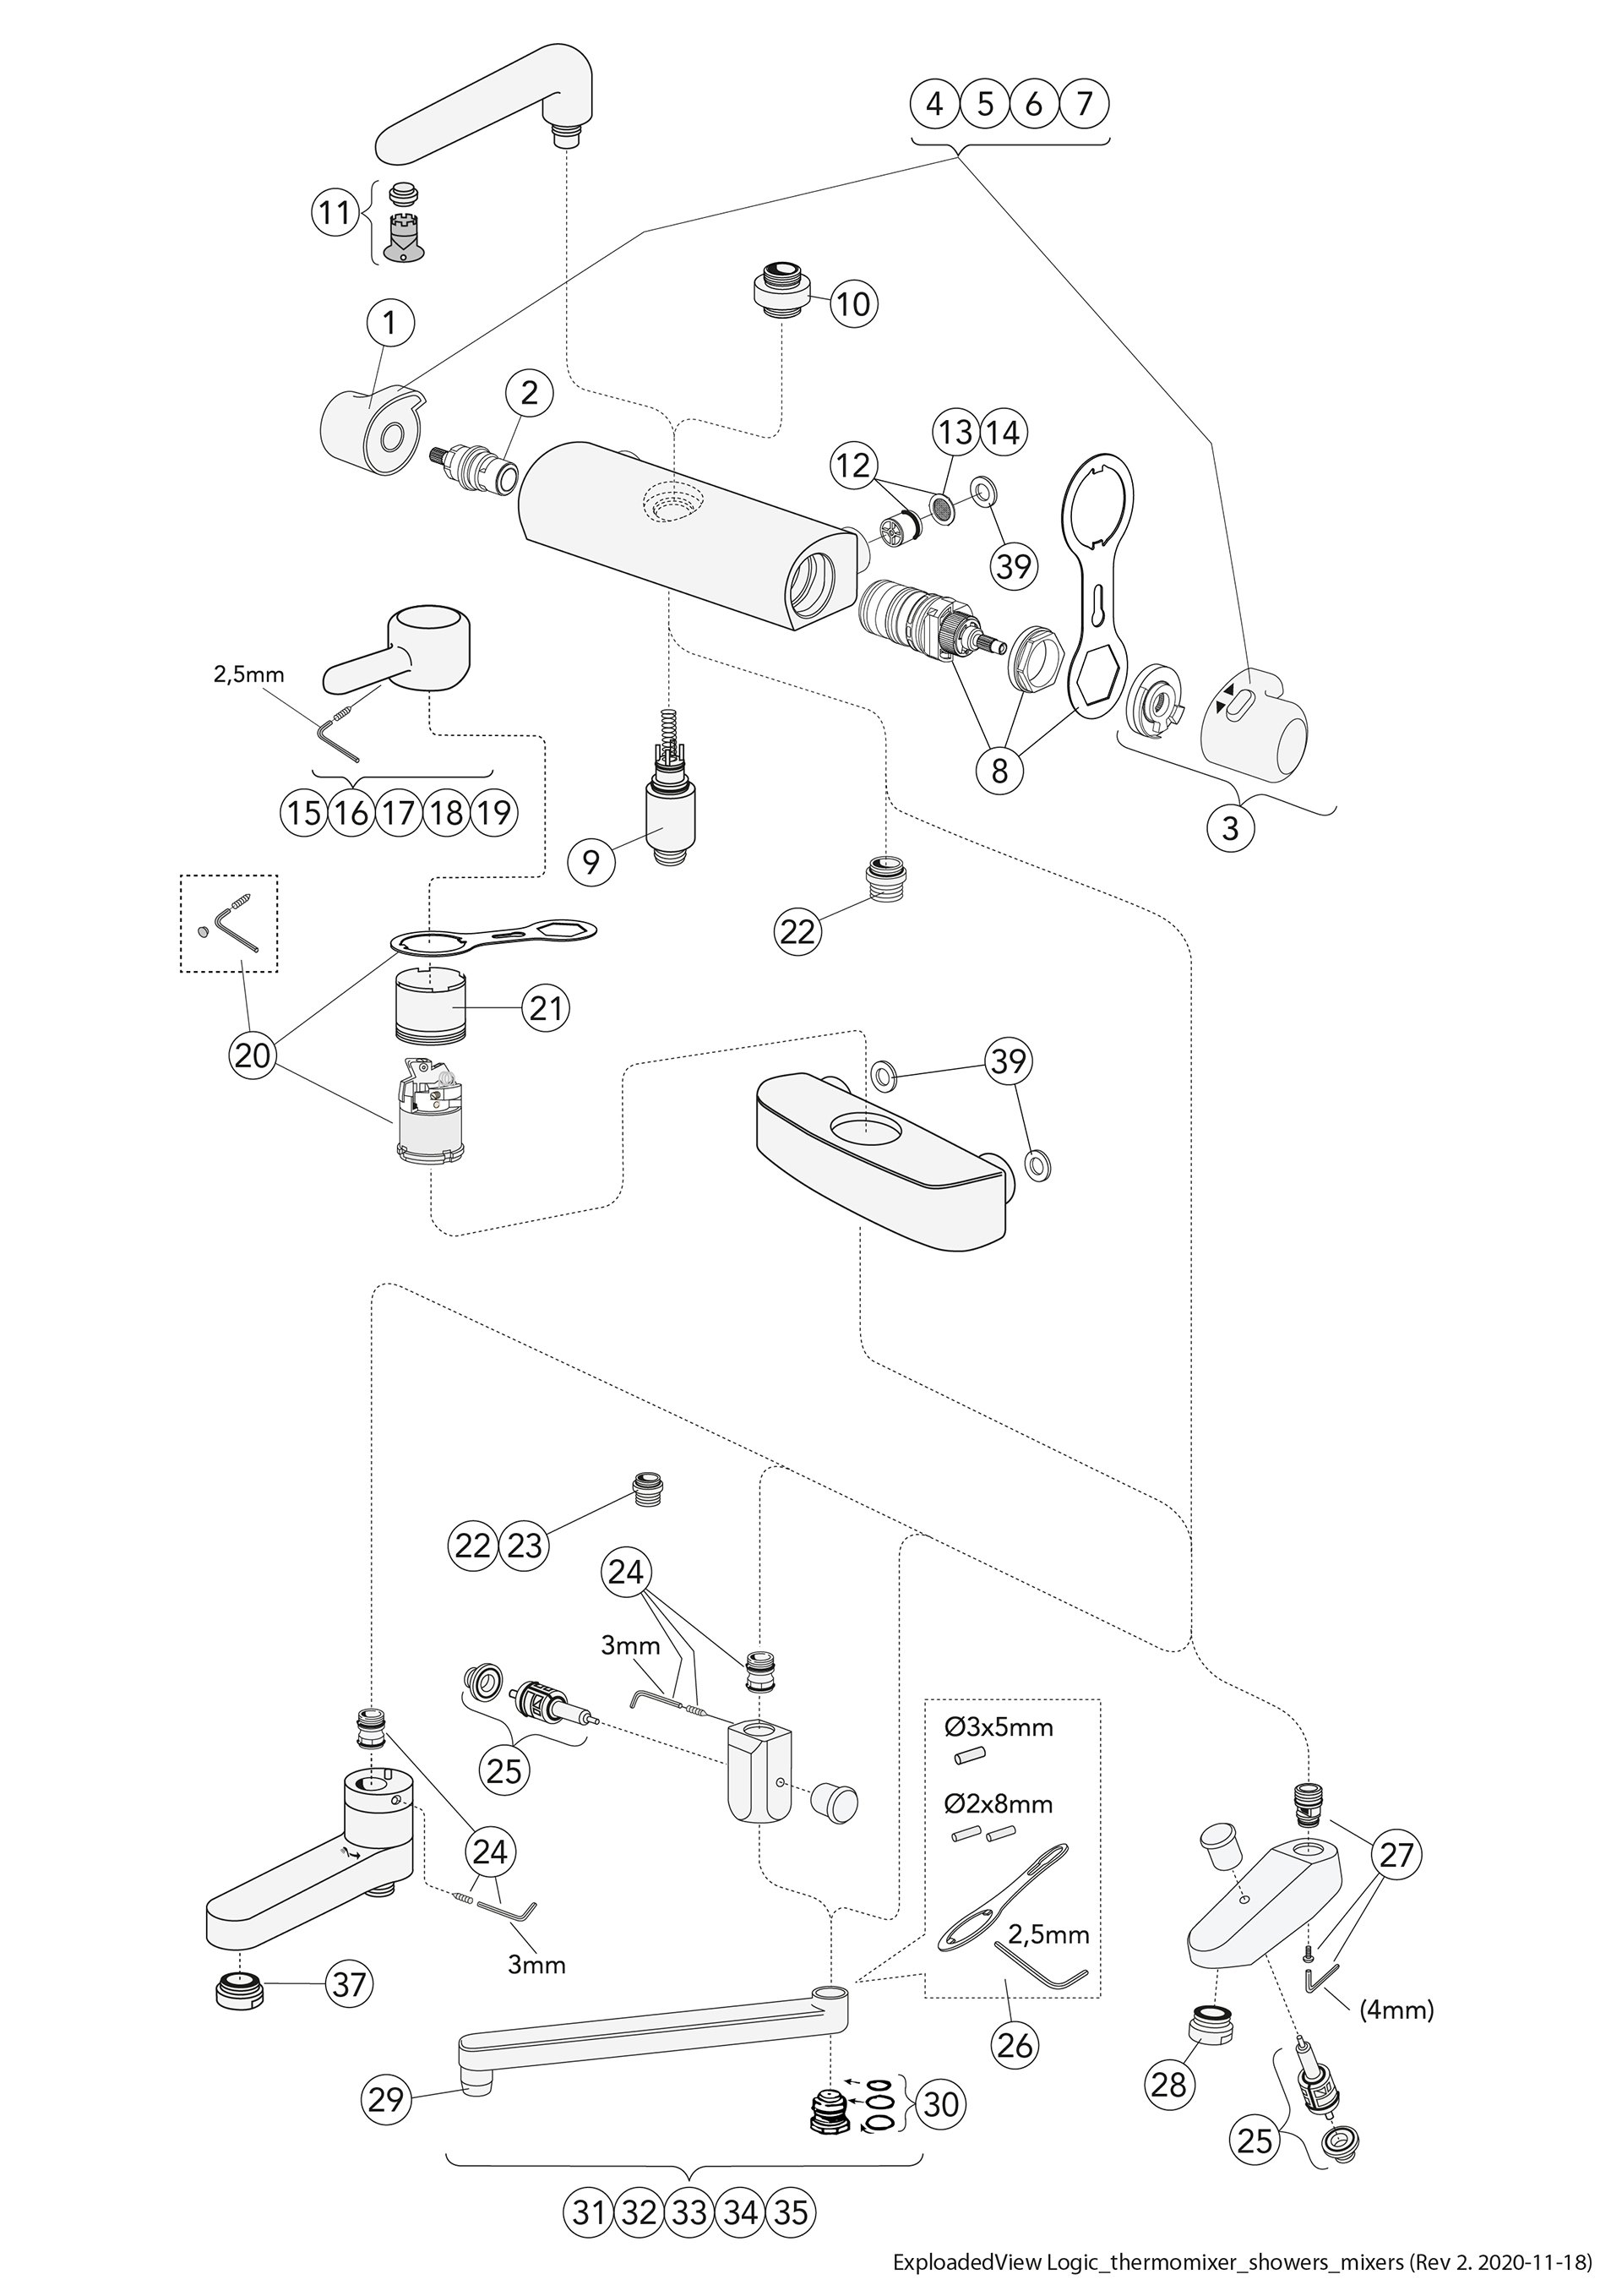 Spareparts/ExplodedView-SP/ExploadedView_Logic_thermostatic_shower_mixers.jpg